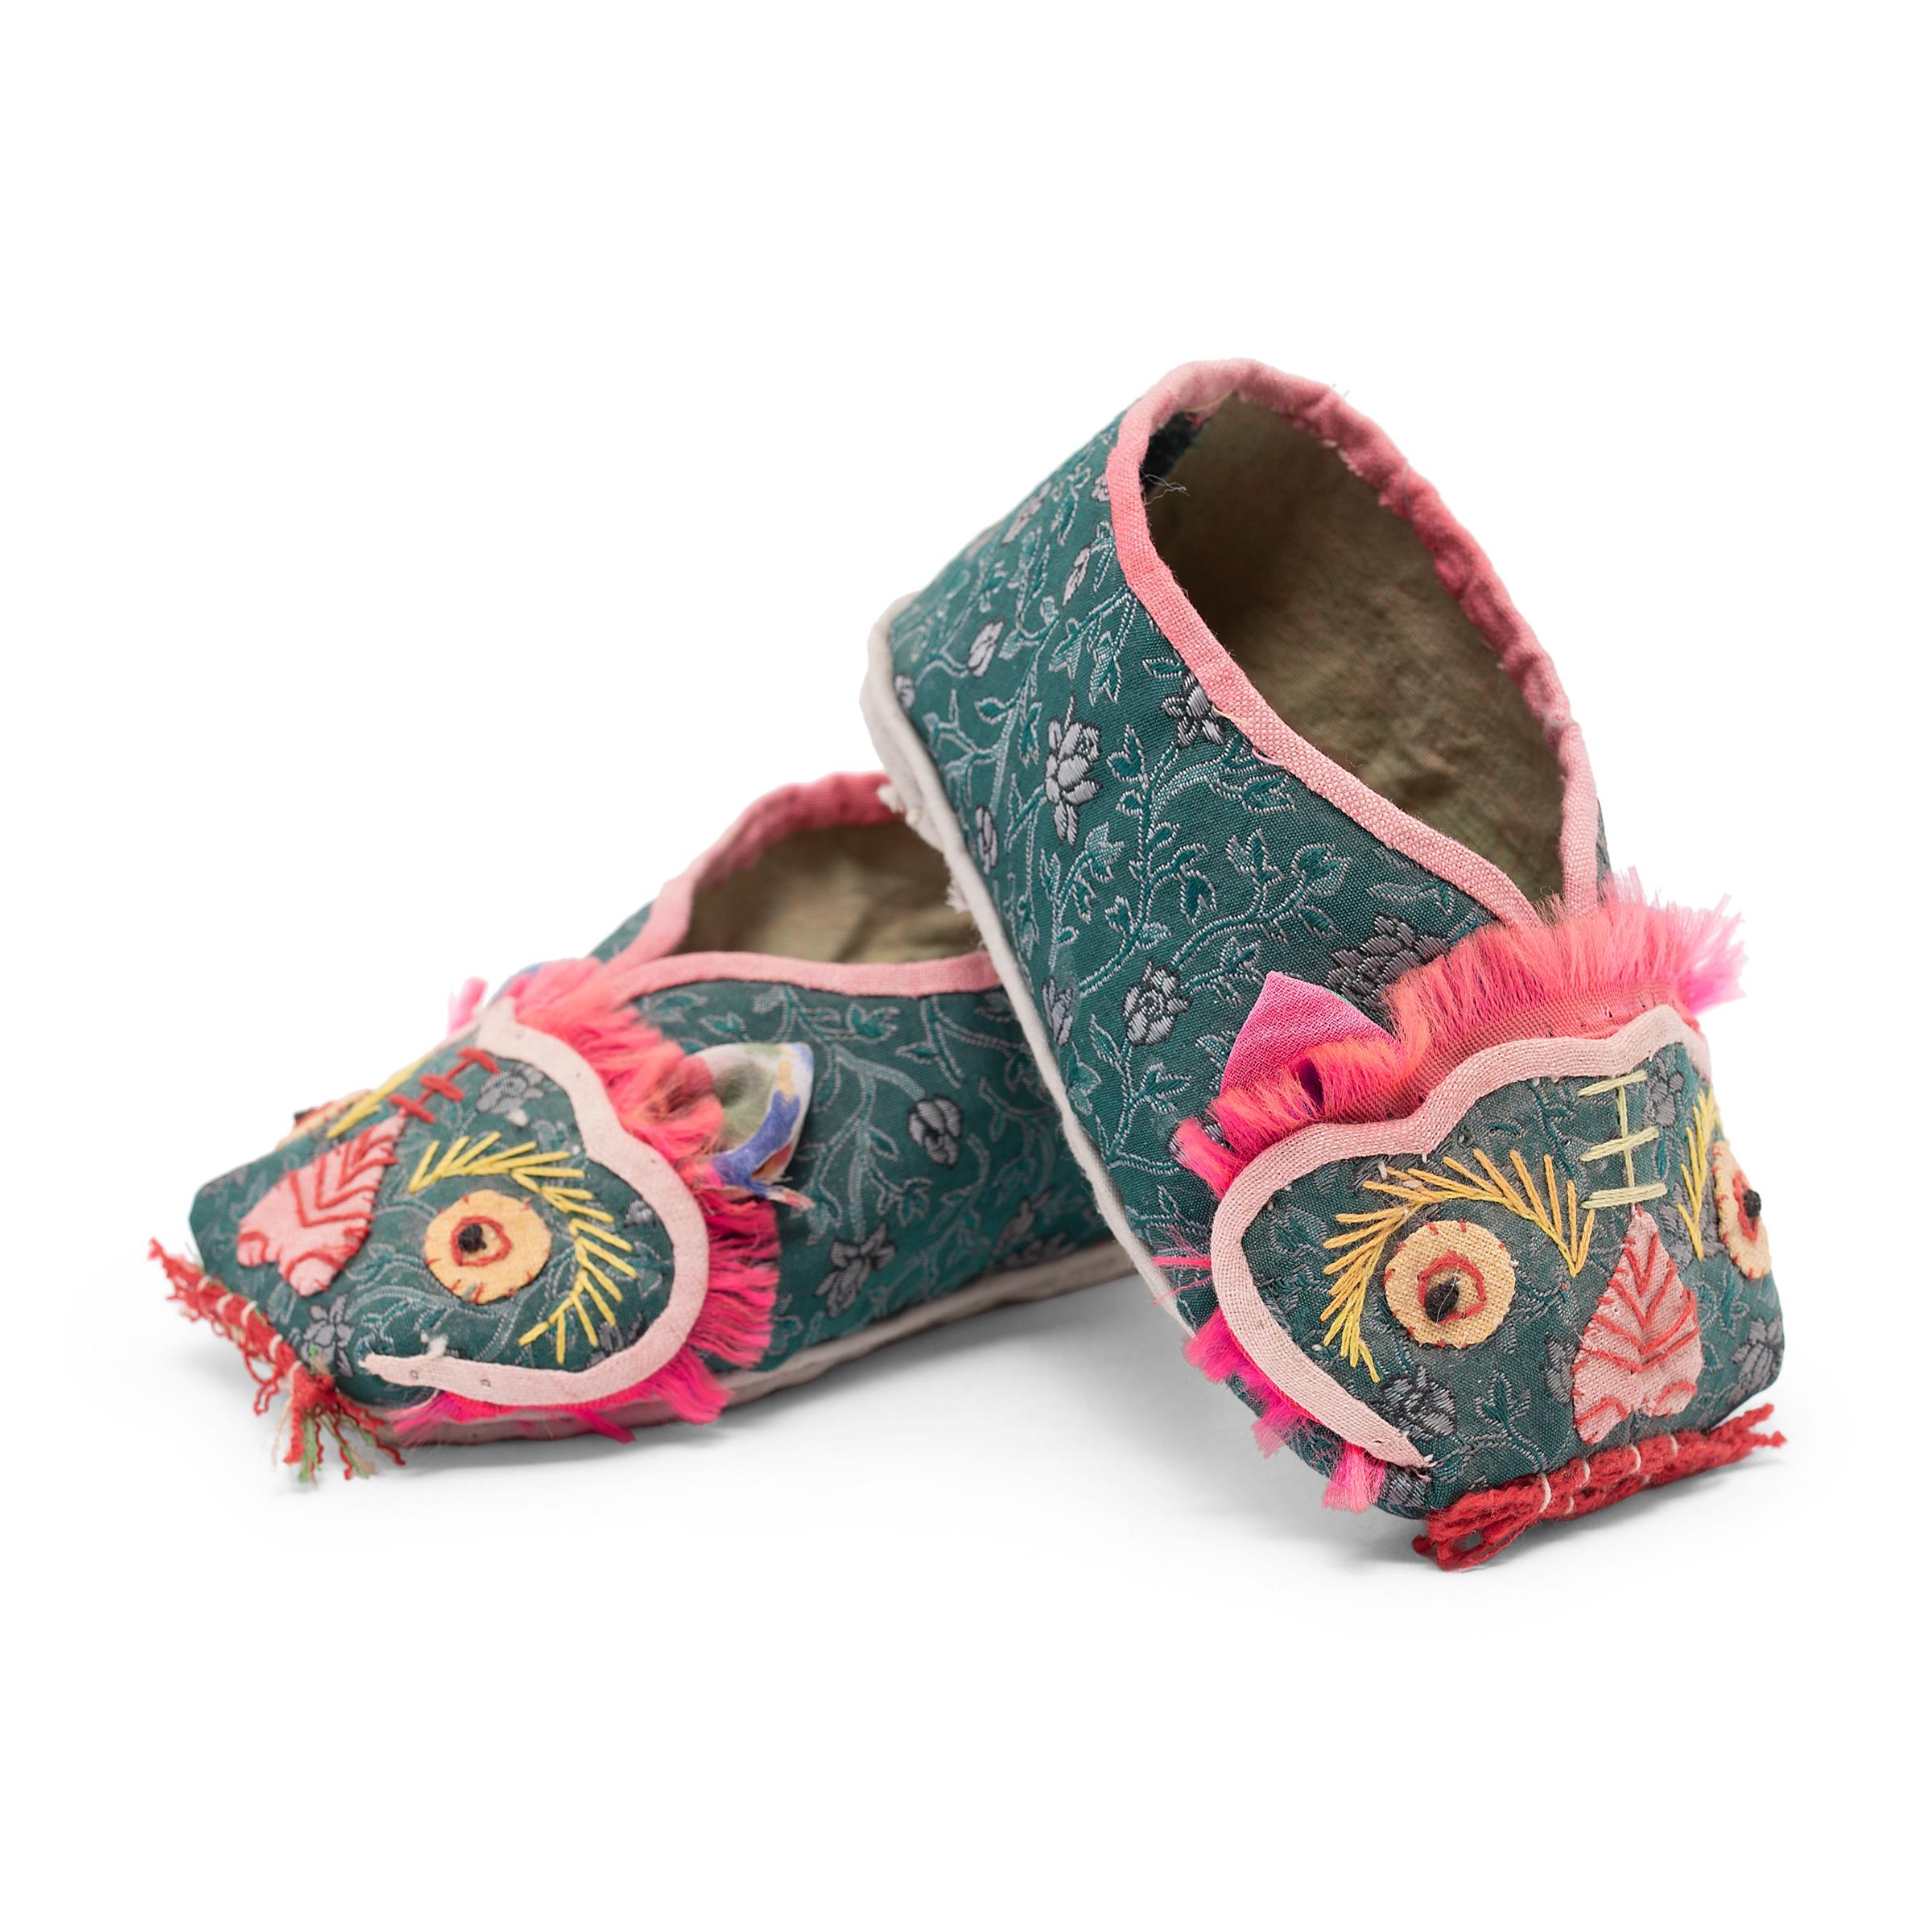 Chinese Pair of Embroidered Lion Children's Slippers, circa 1920